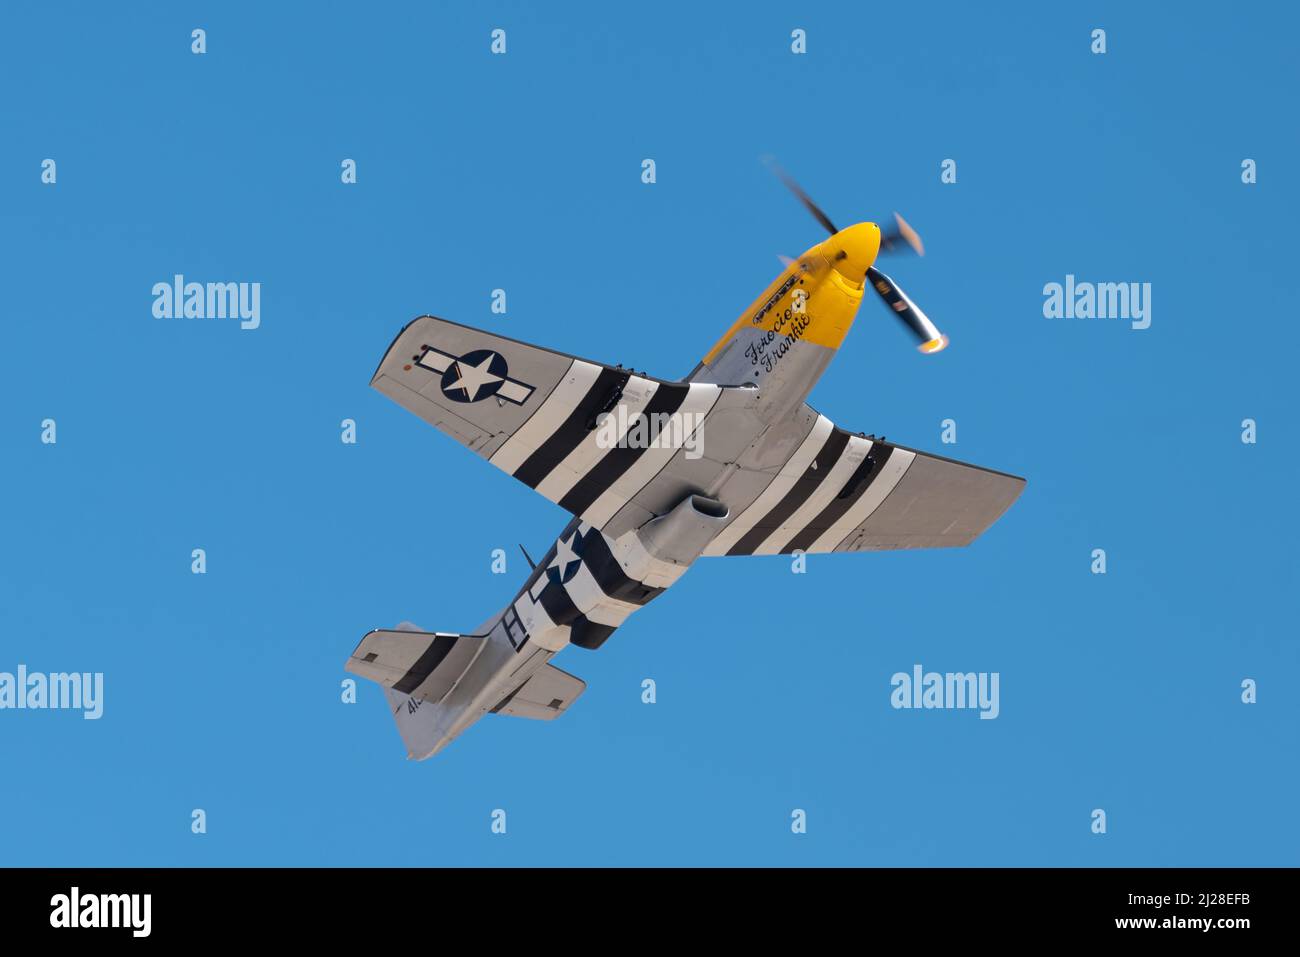 ESKISEHIR, TURKEY - SEPTEMBER 12, 2021: M.S.O. Air and Space Museum's North American P-51D Mustang, Ferocious Frankie, staging a show at Sivrihisar SH Stock Photo